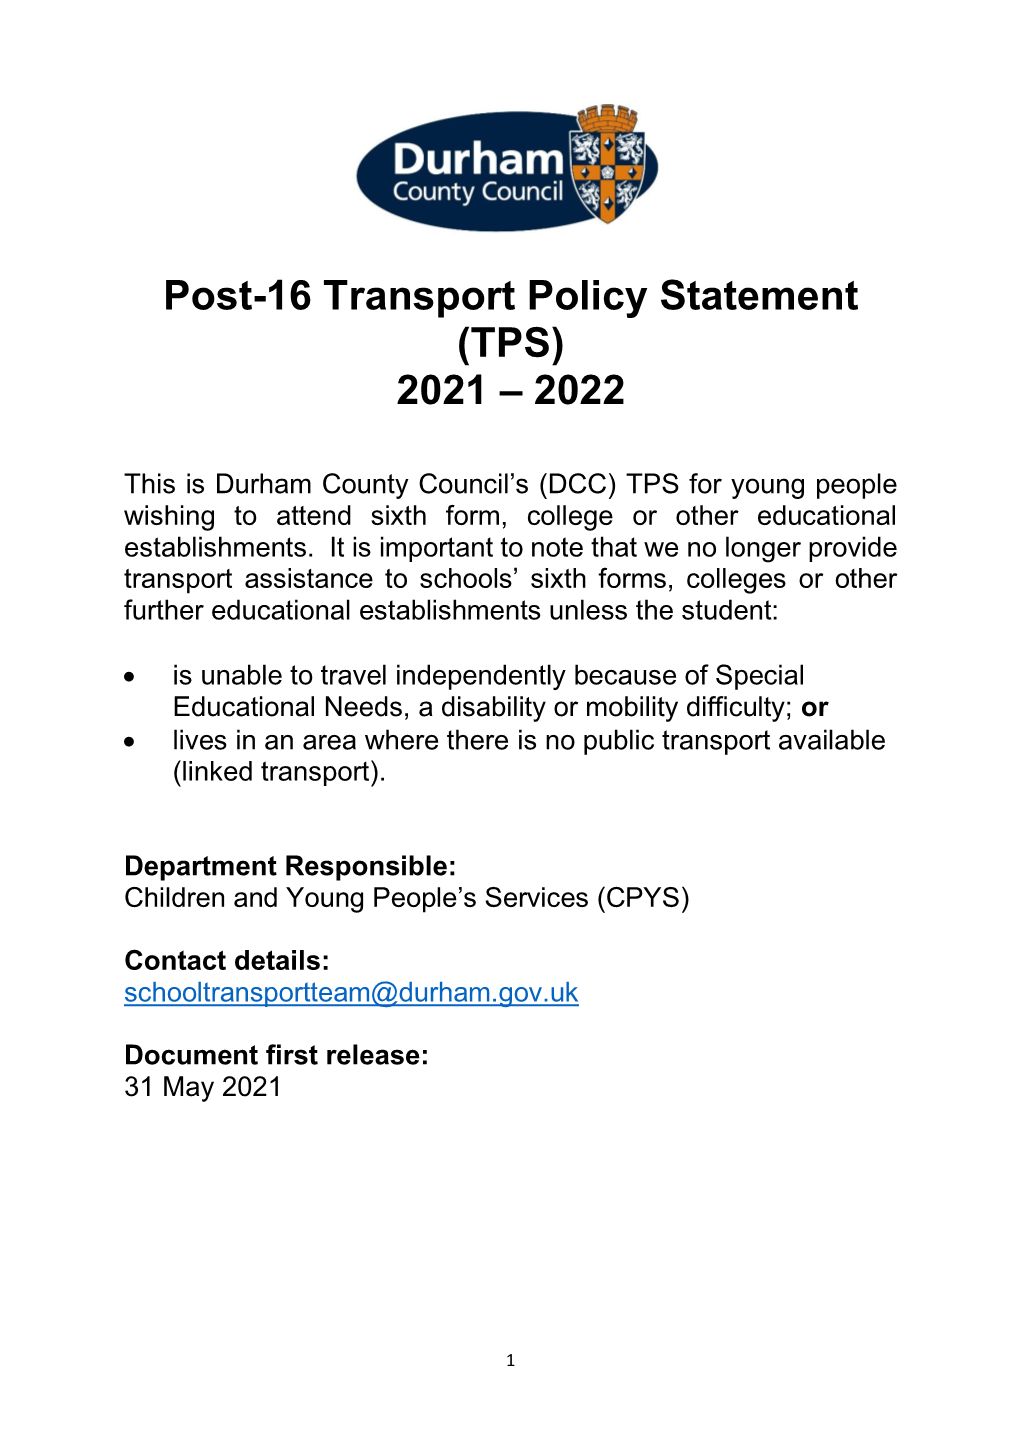 Post-16 Transport Policy Statement (TPS) 2021 – 2022